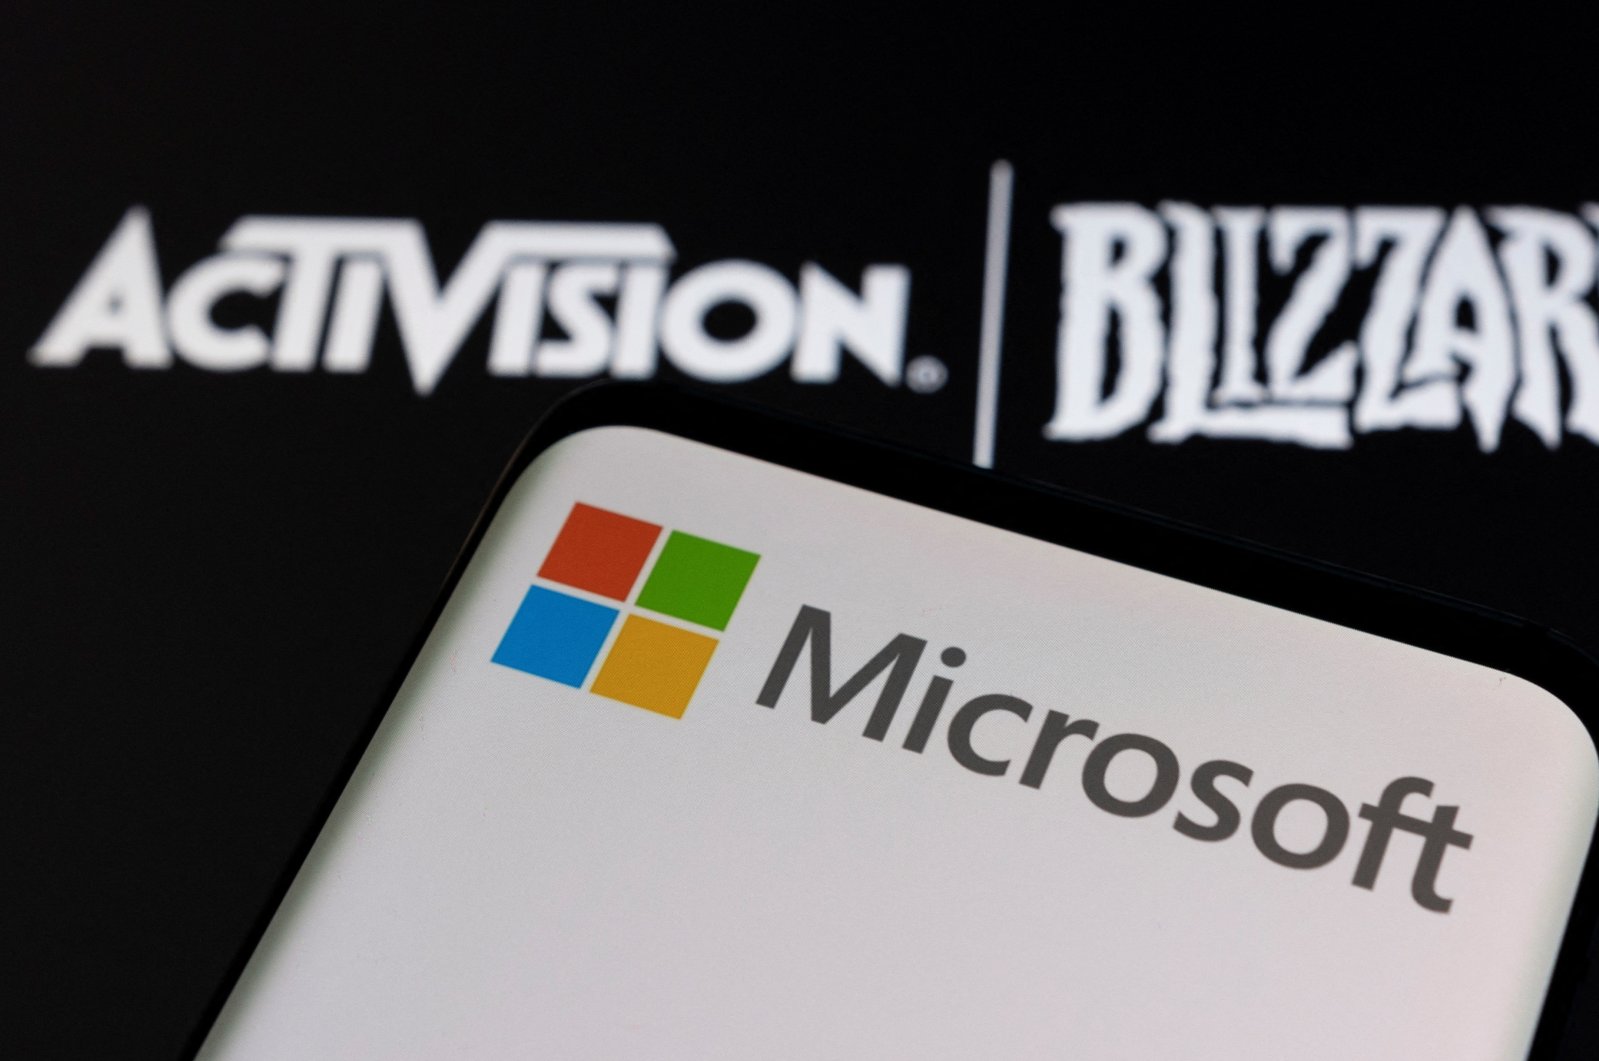 Microsoft logo is seen on a smartphone placed on displayed Activision Blizzard logo in this illustration taken on Jan. 18, 2022. (Reuters Photo)